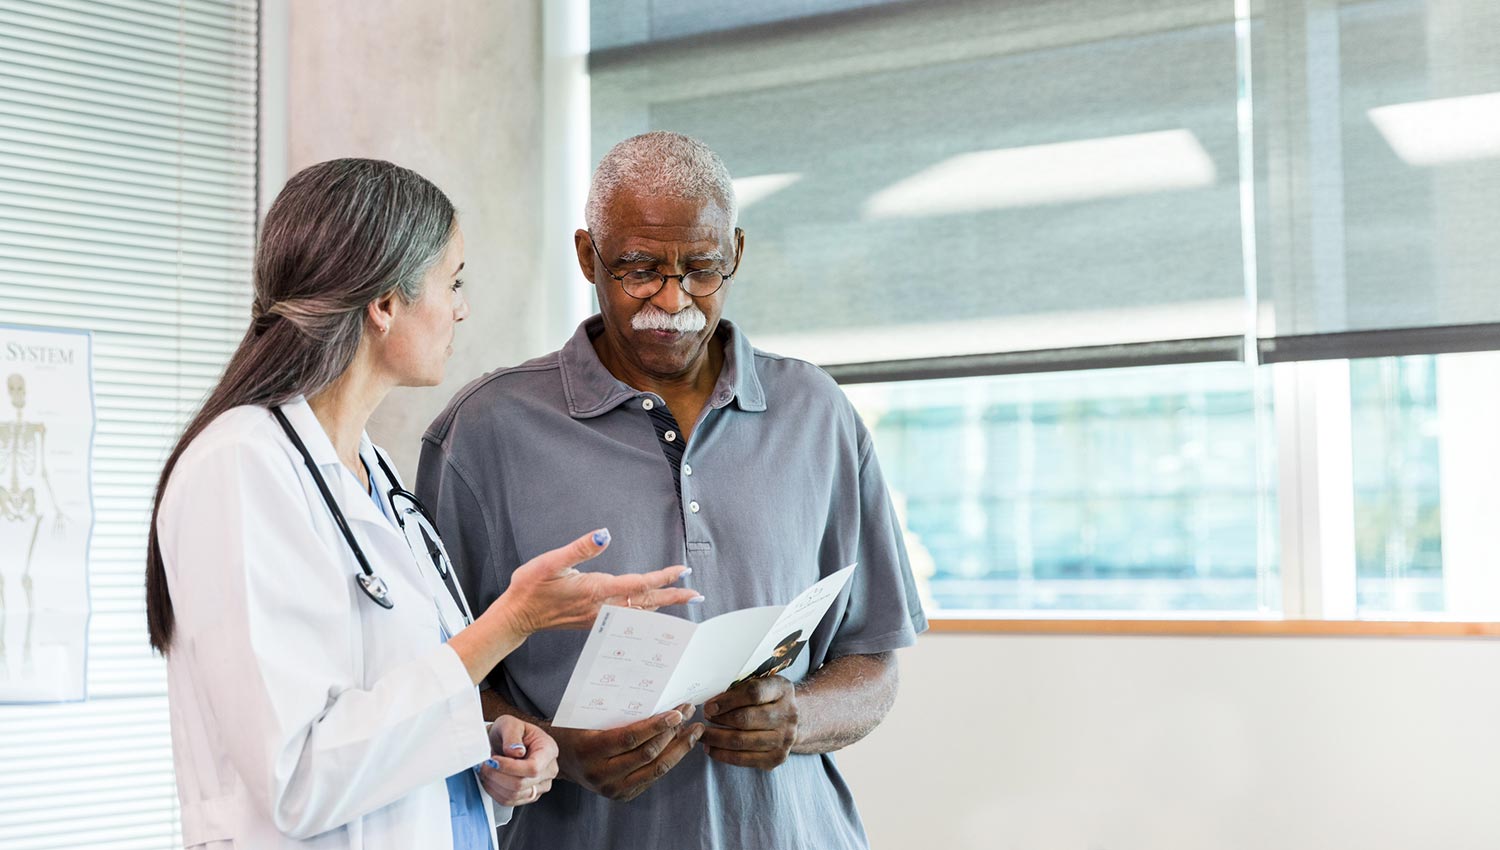 A doctor and a patient discuss a living will vs. an advance directive for medical planning.